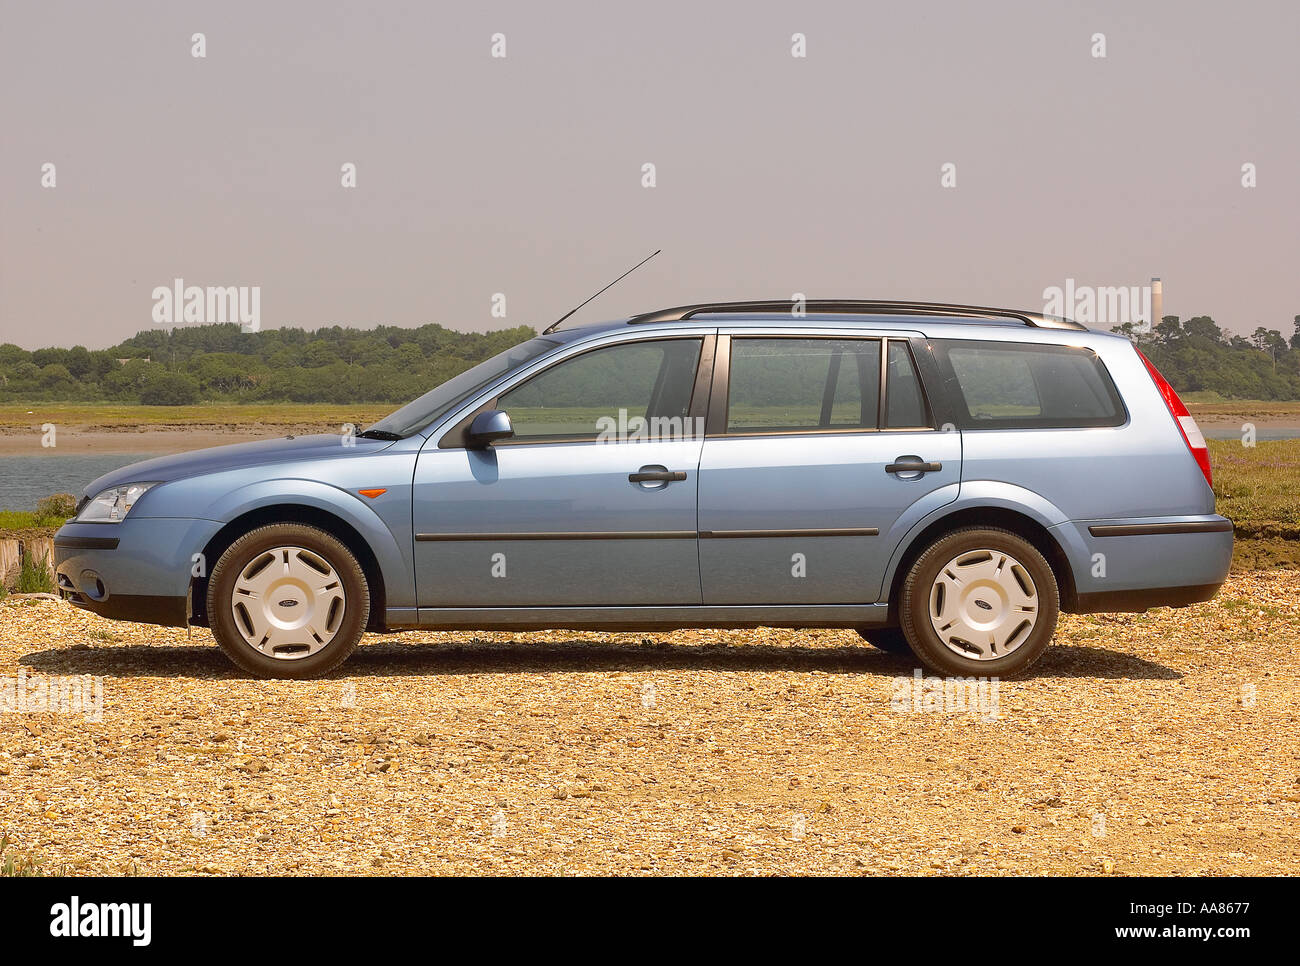 elkaar Inspecteren vriendschap 2003 Ford Mondeo Lx High Resolution Stock Photography and Images - Alamy